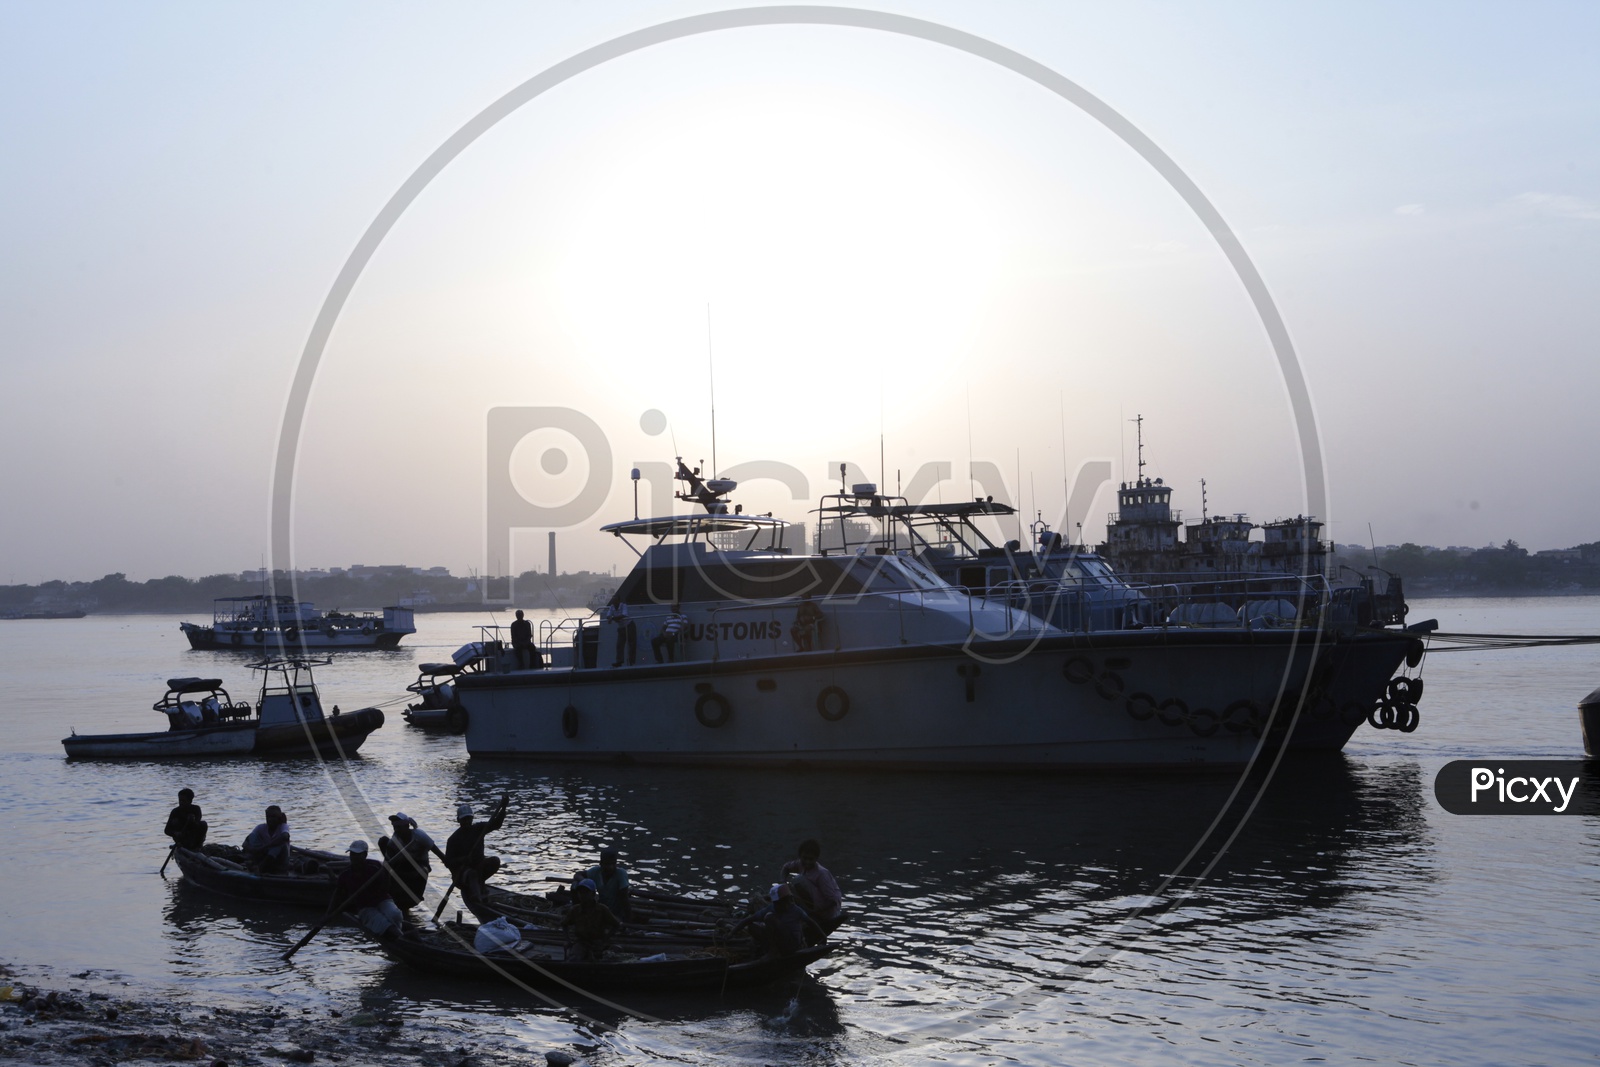 Gandolas and Customs Boats alongside the Hooghly River during the sunset